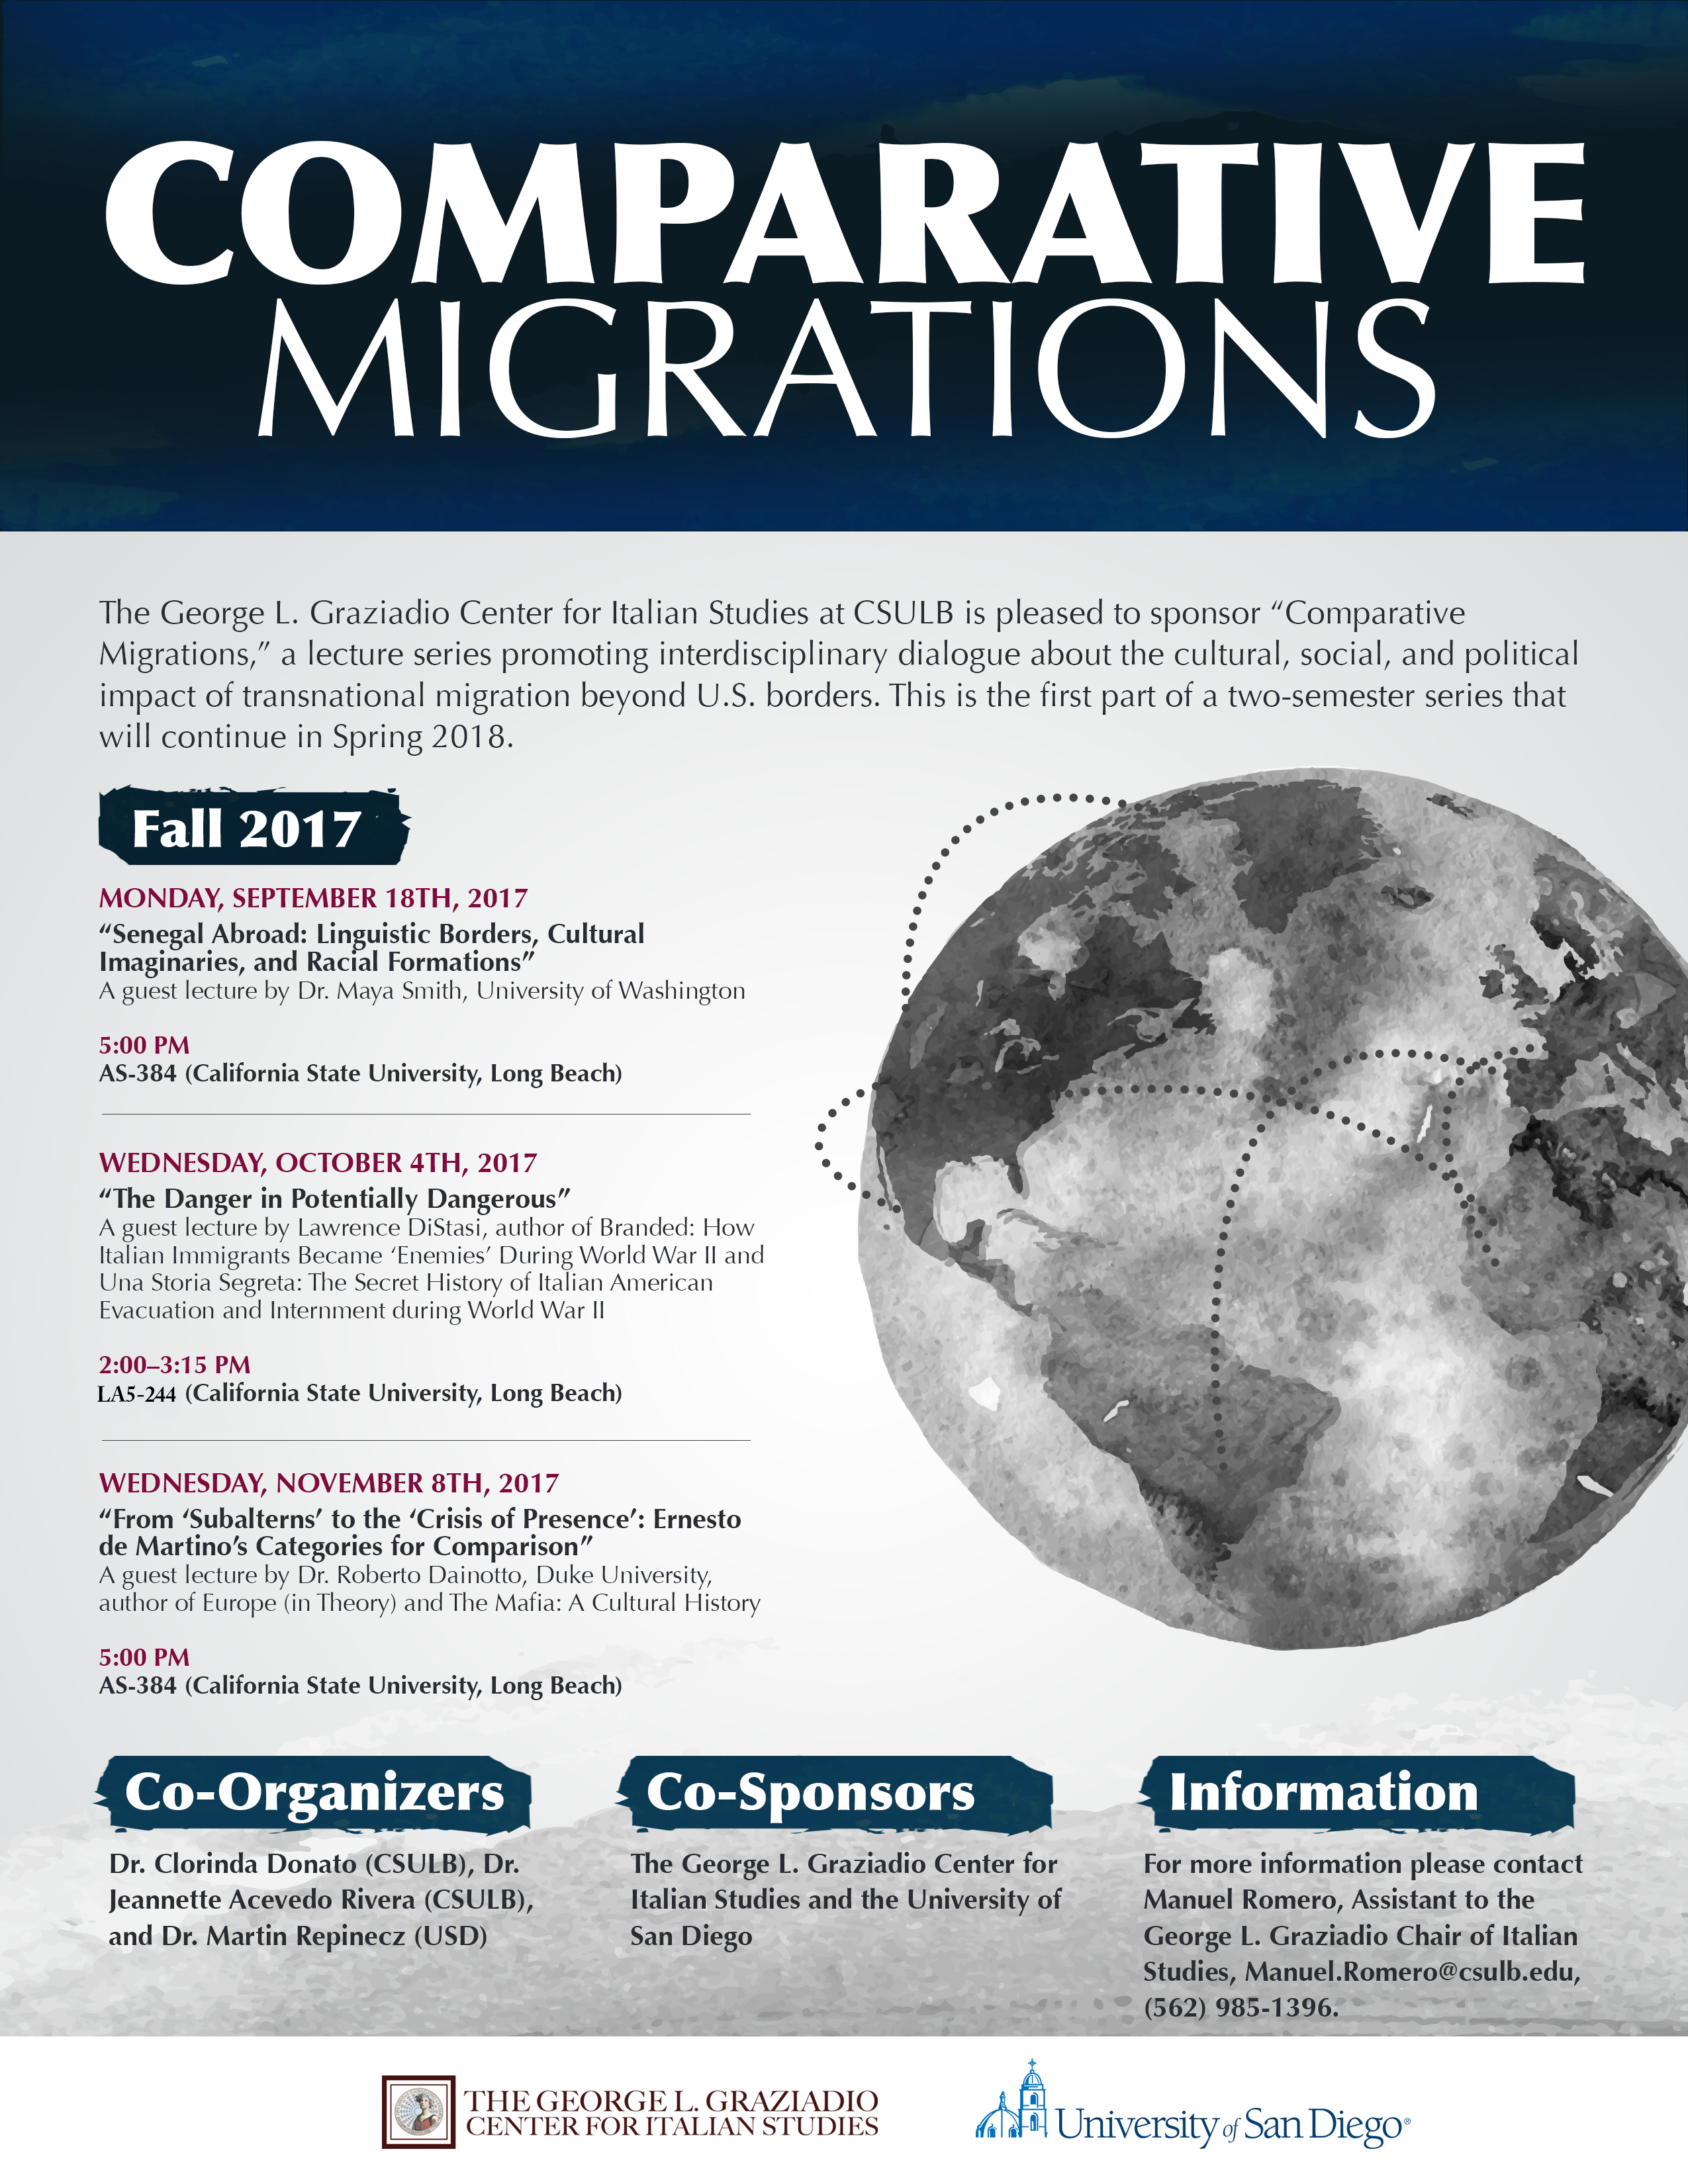 Flyer for Comparative Migrations Lecture Series